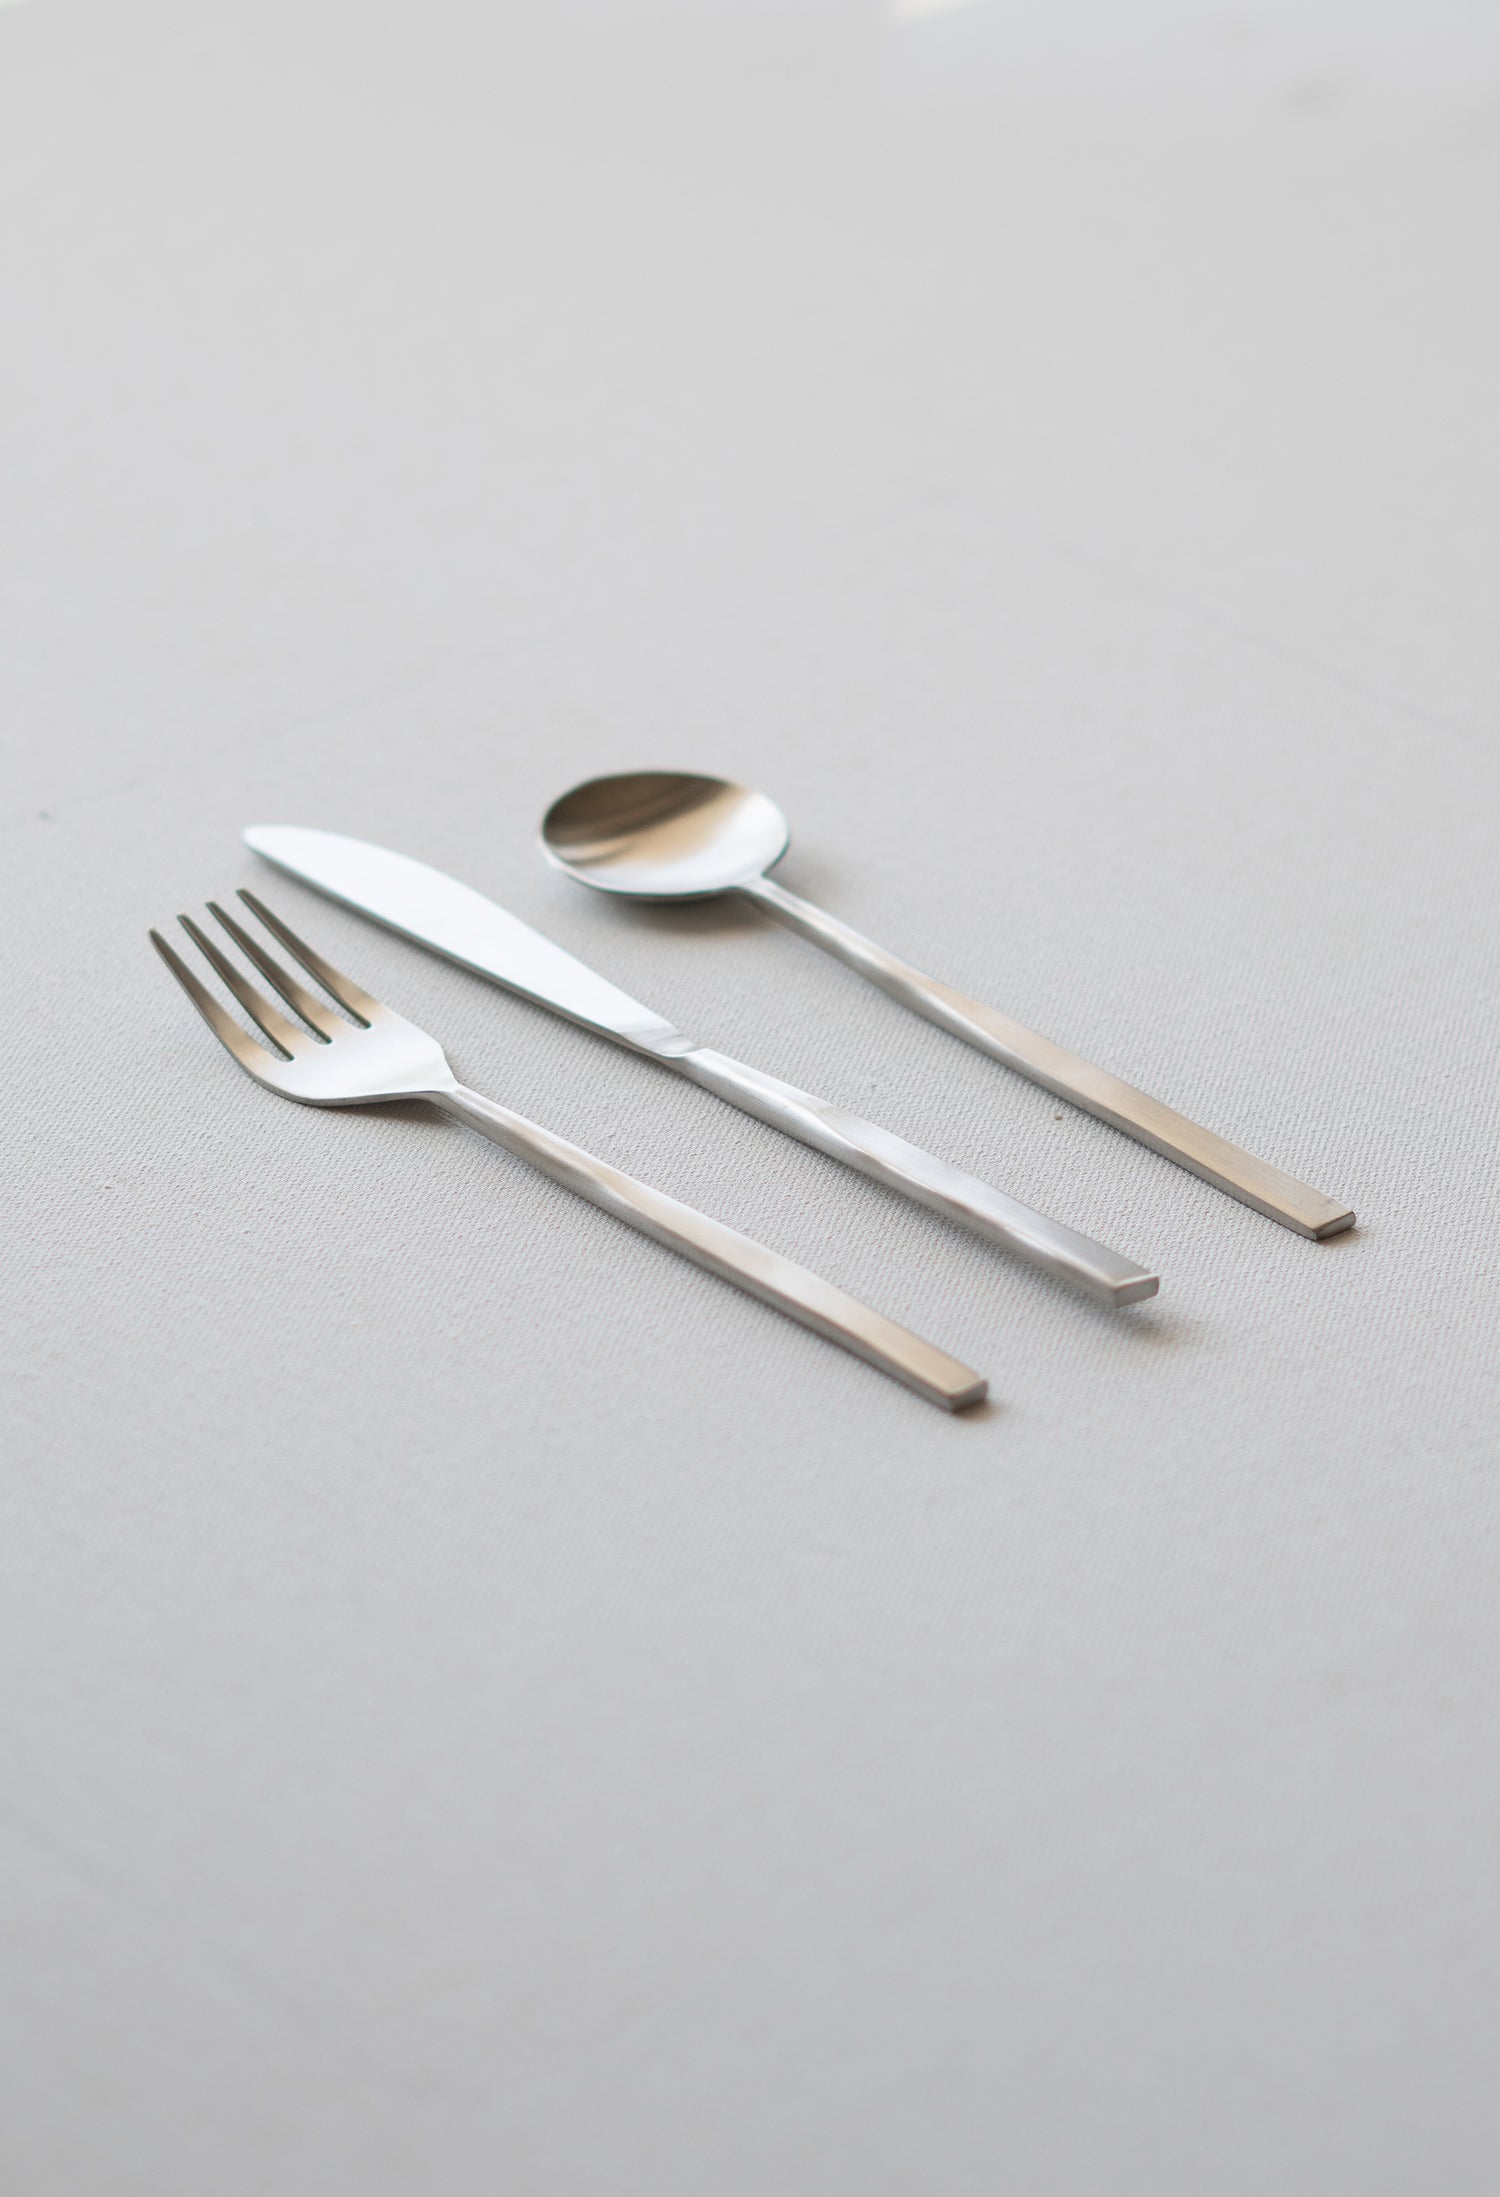 stainless steel cutlery 